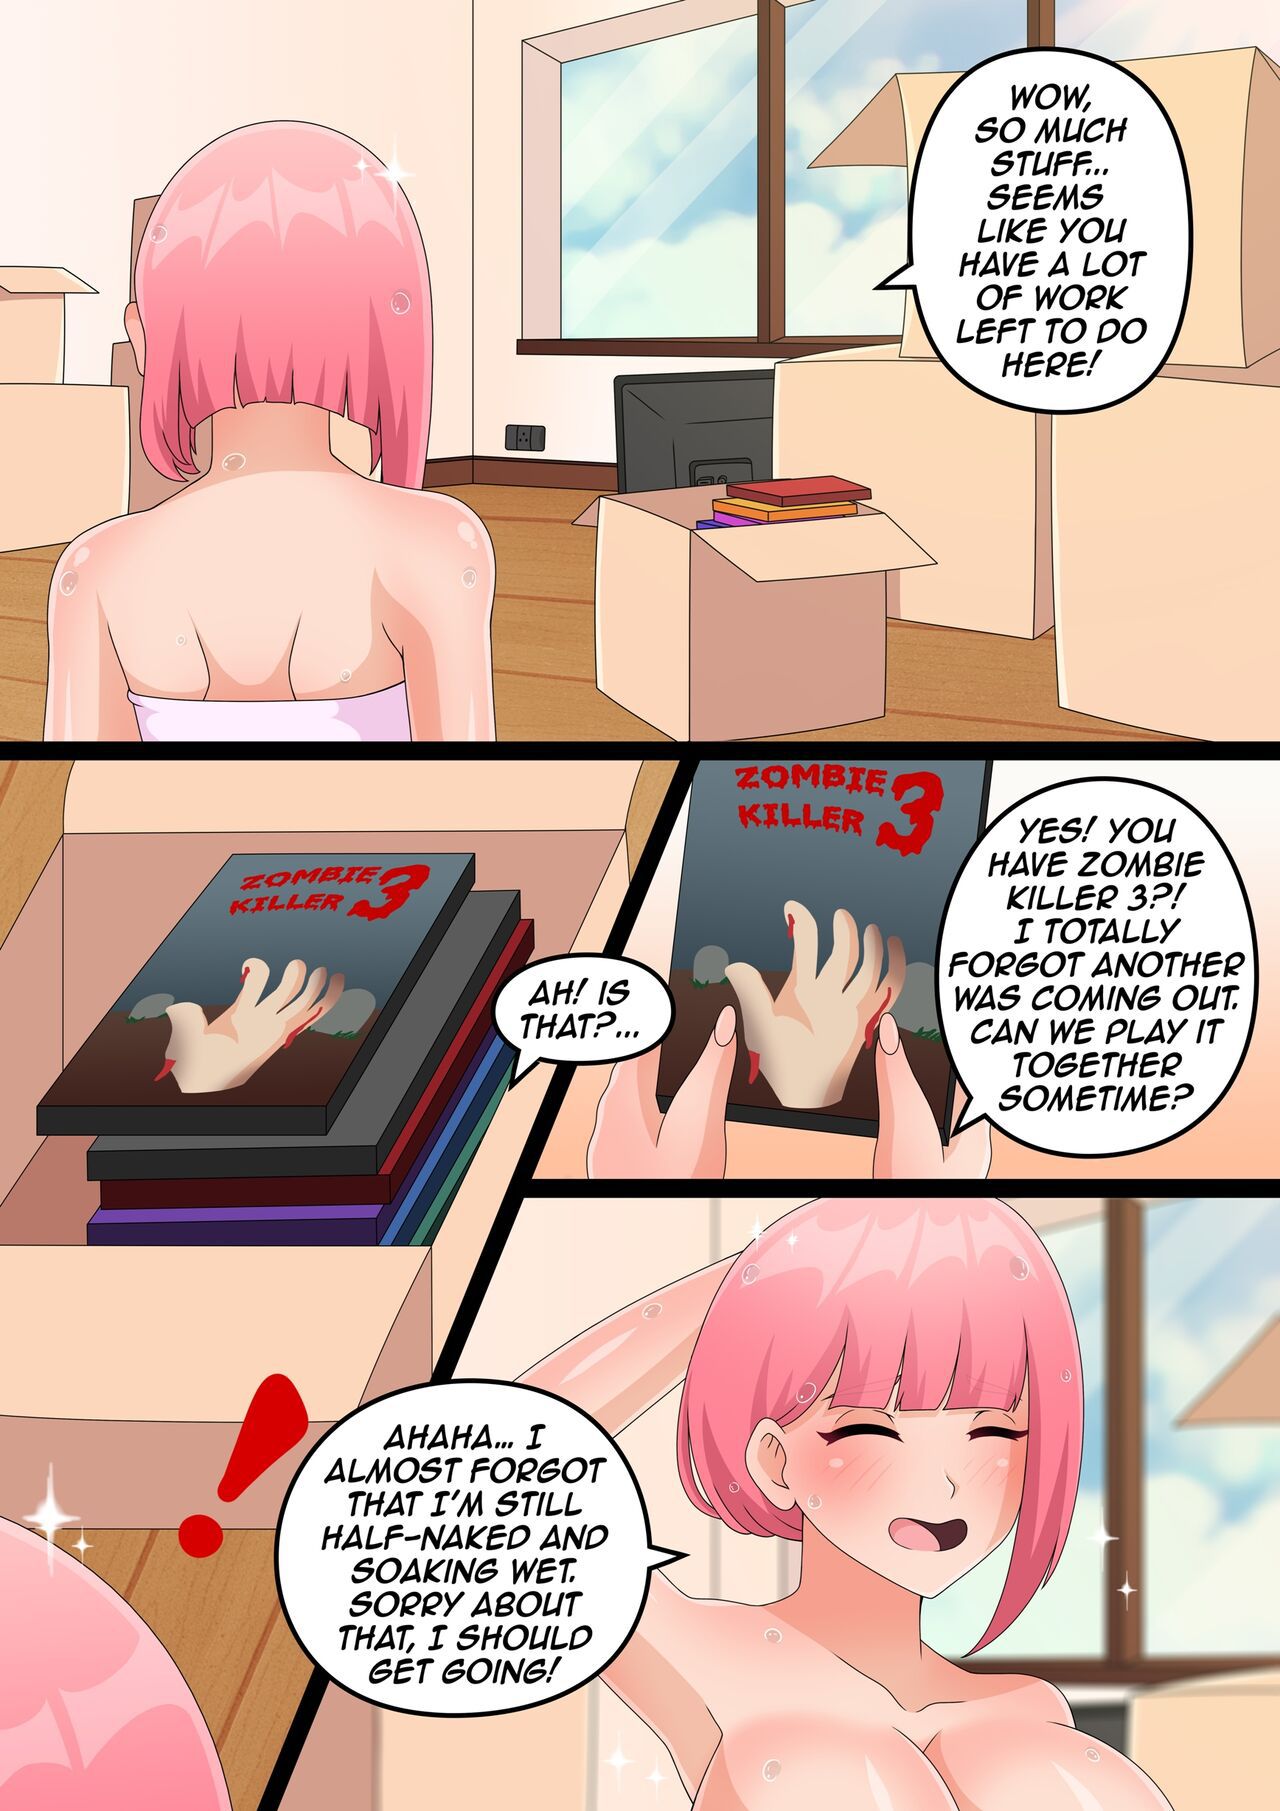 Zoey The Love Story [page 24 added] 8